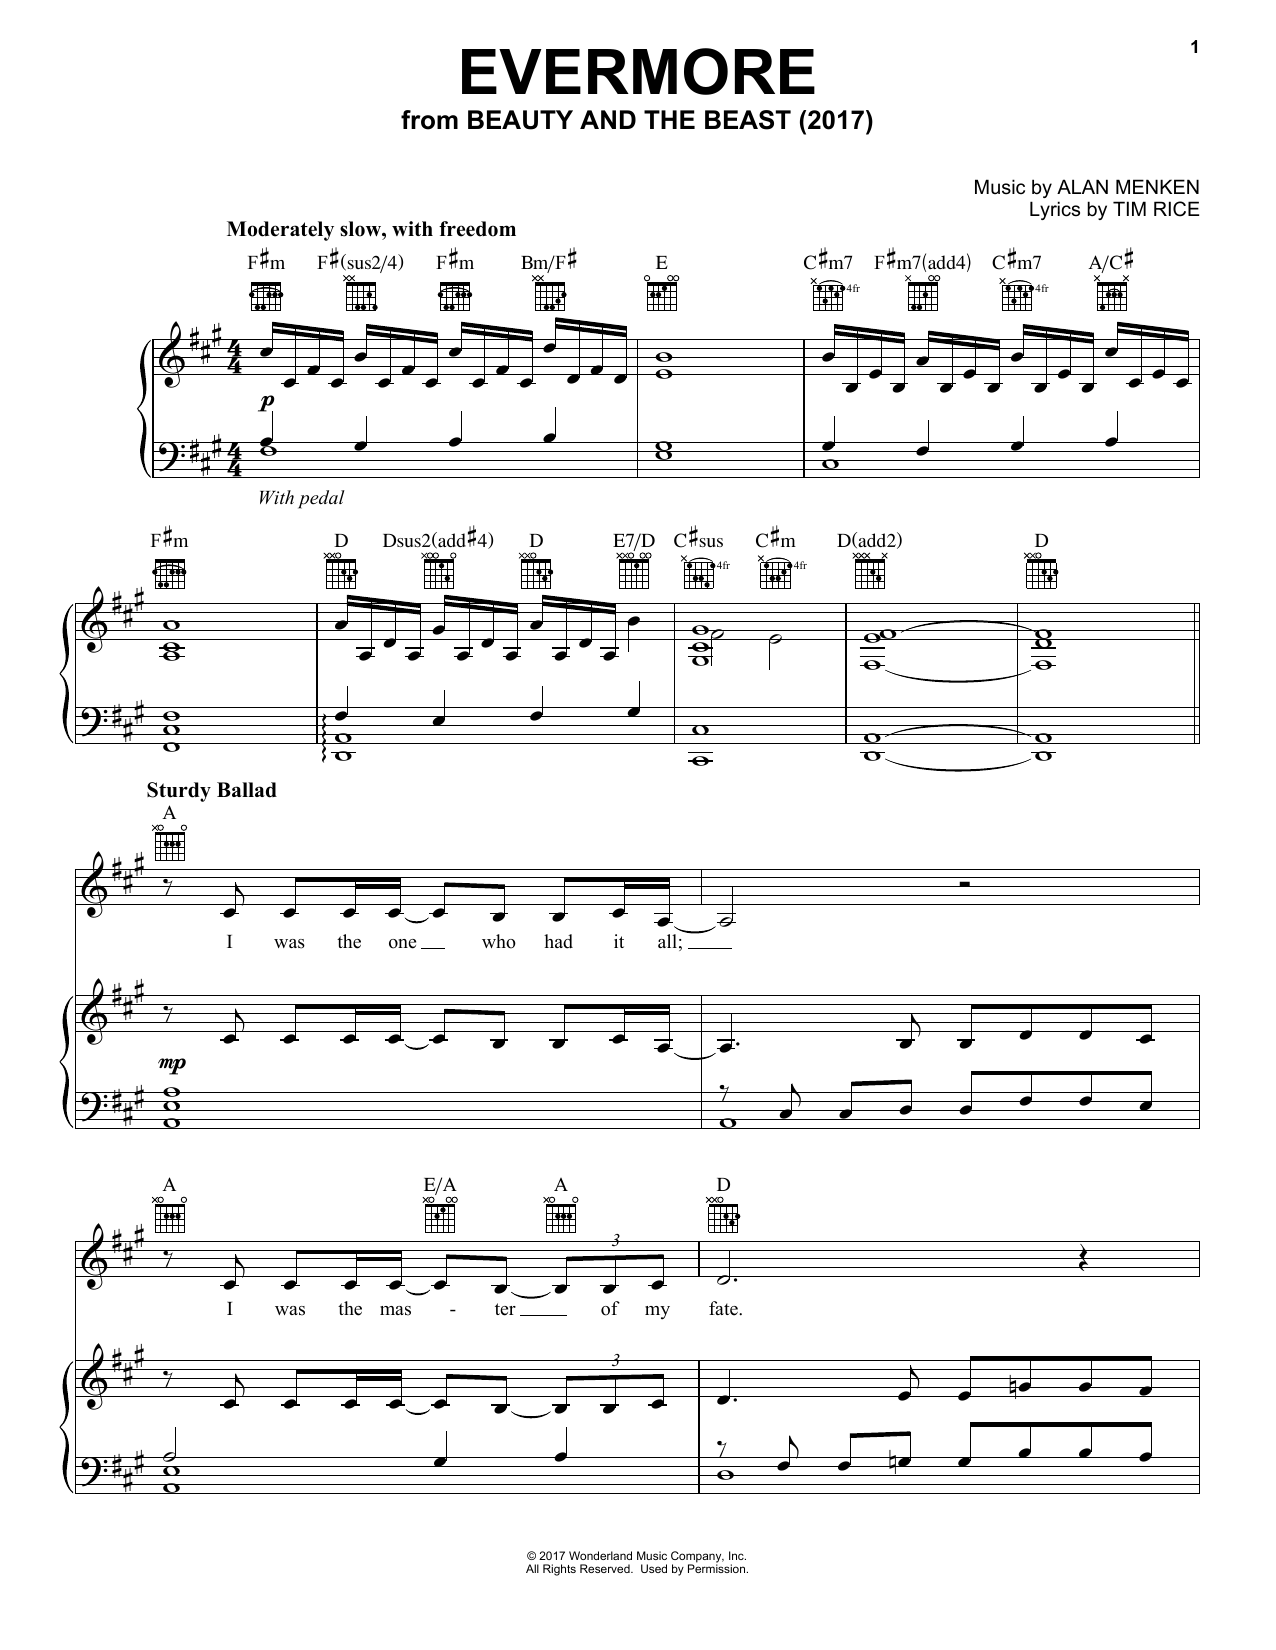 Josh Groban Evermore sheet music notes and chords. Download Printable PDF.